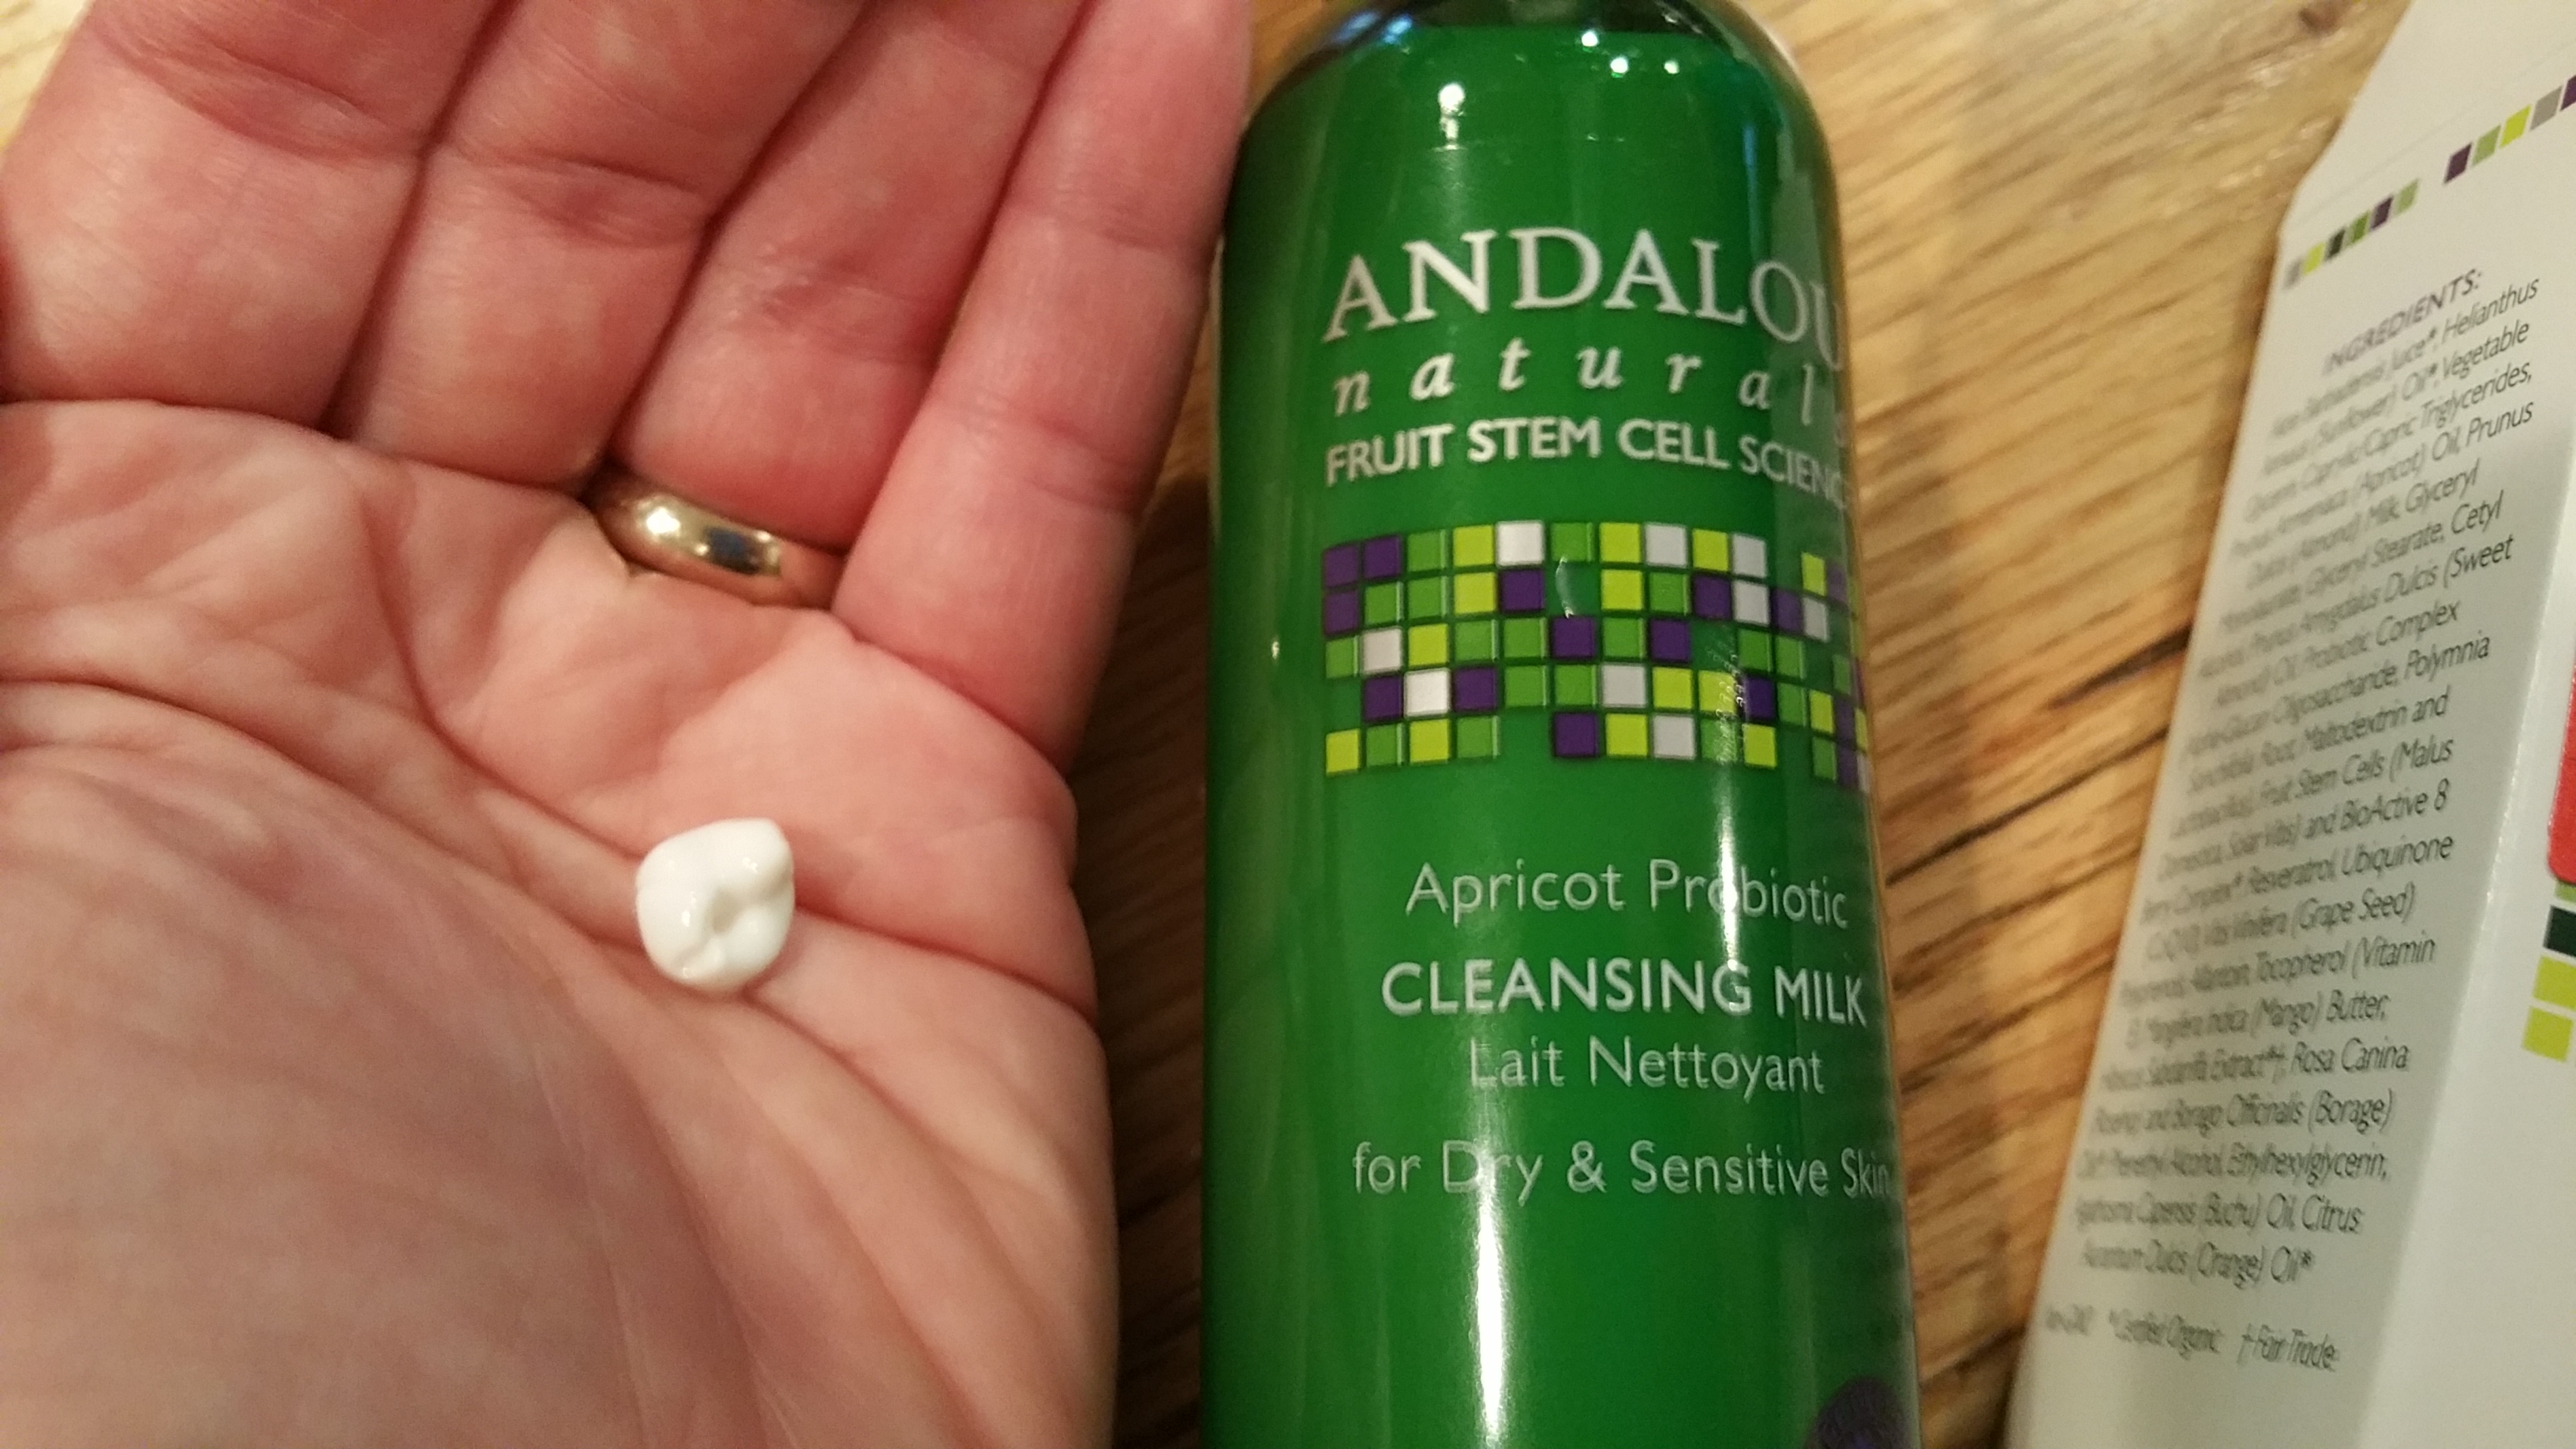 Review of Andalou Naturals Apricot Probiotic Cleansing Milk